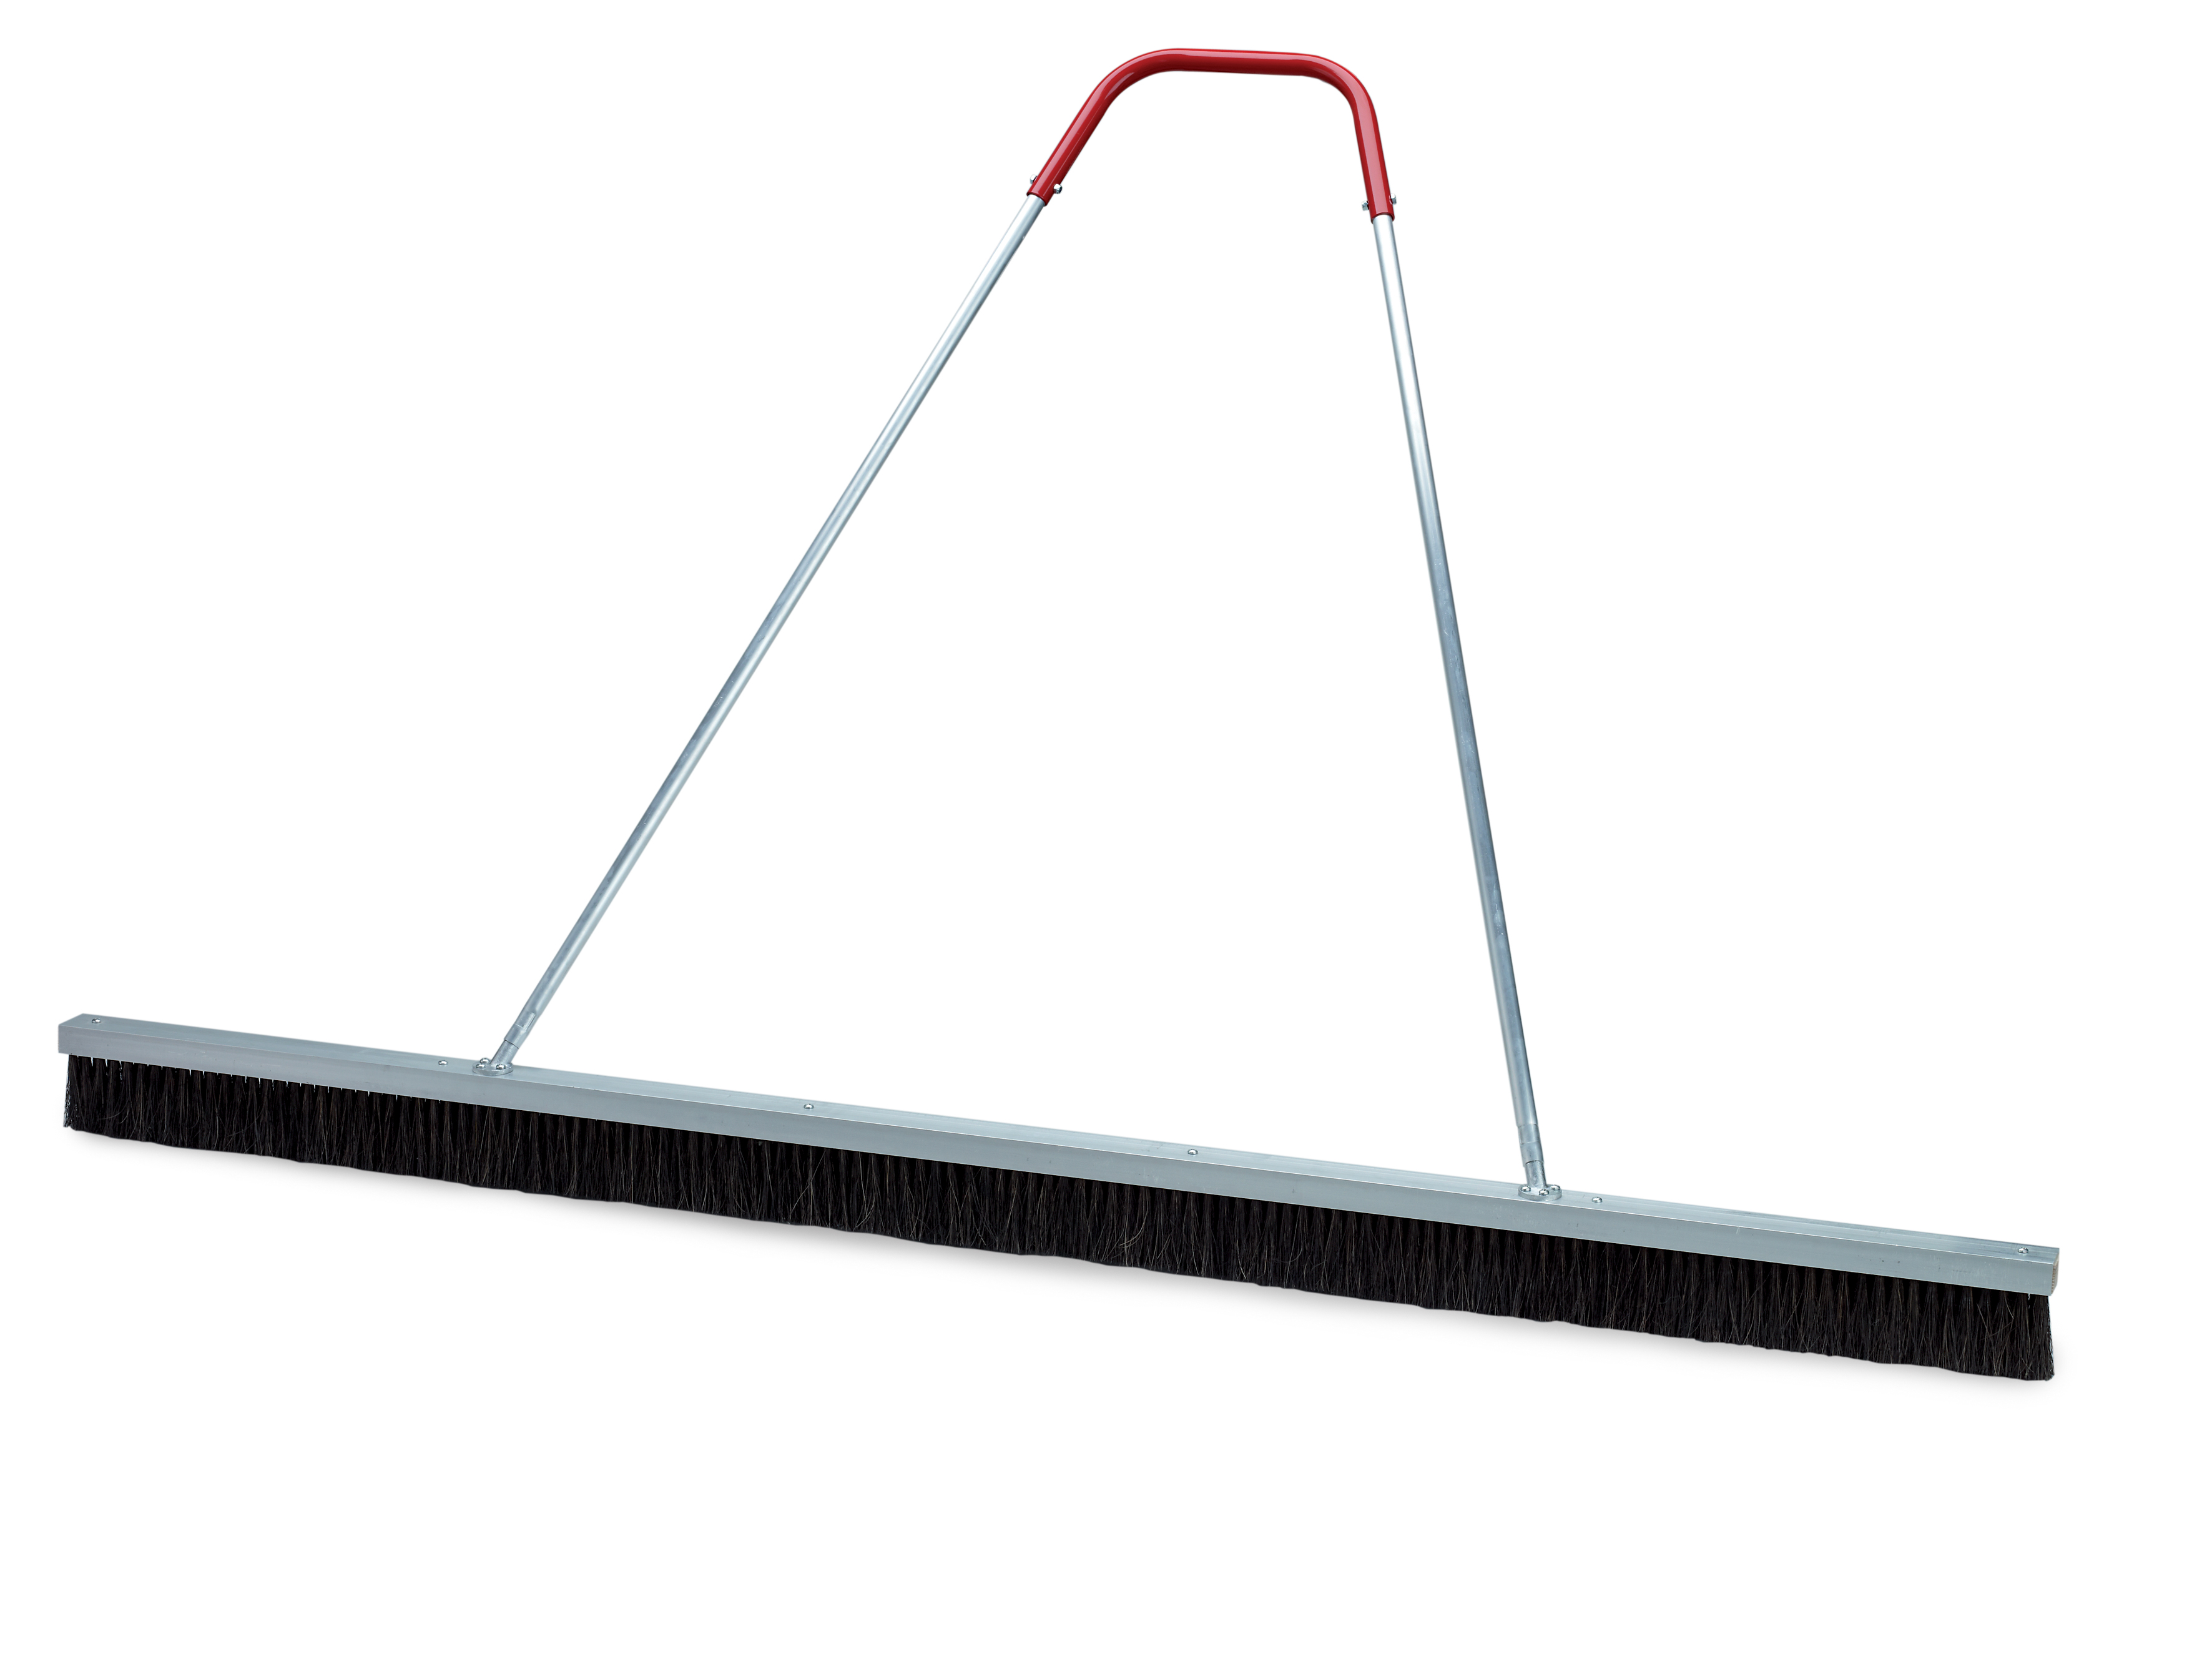 Broom for Granular Surfaces